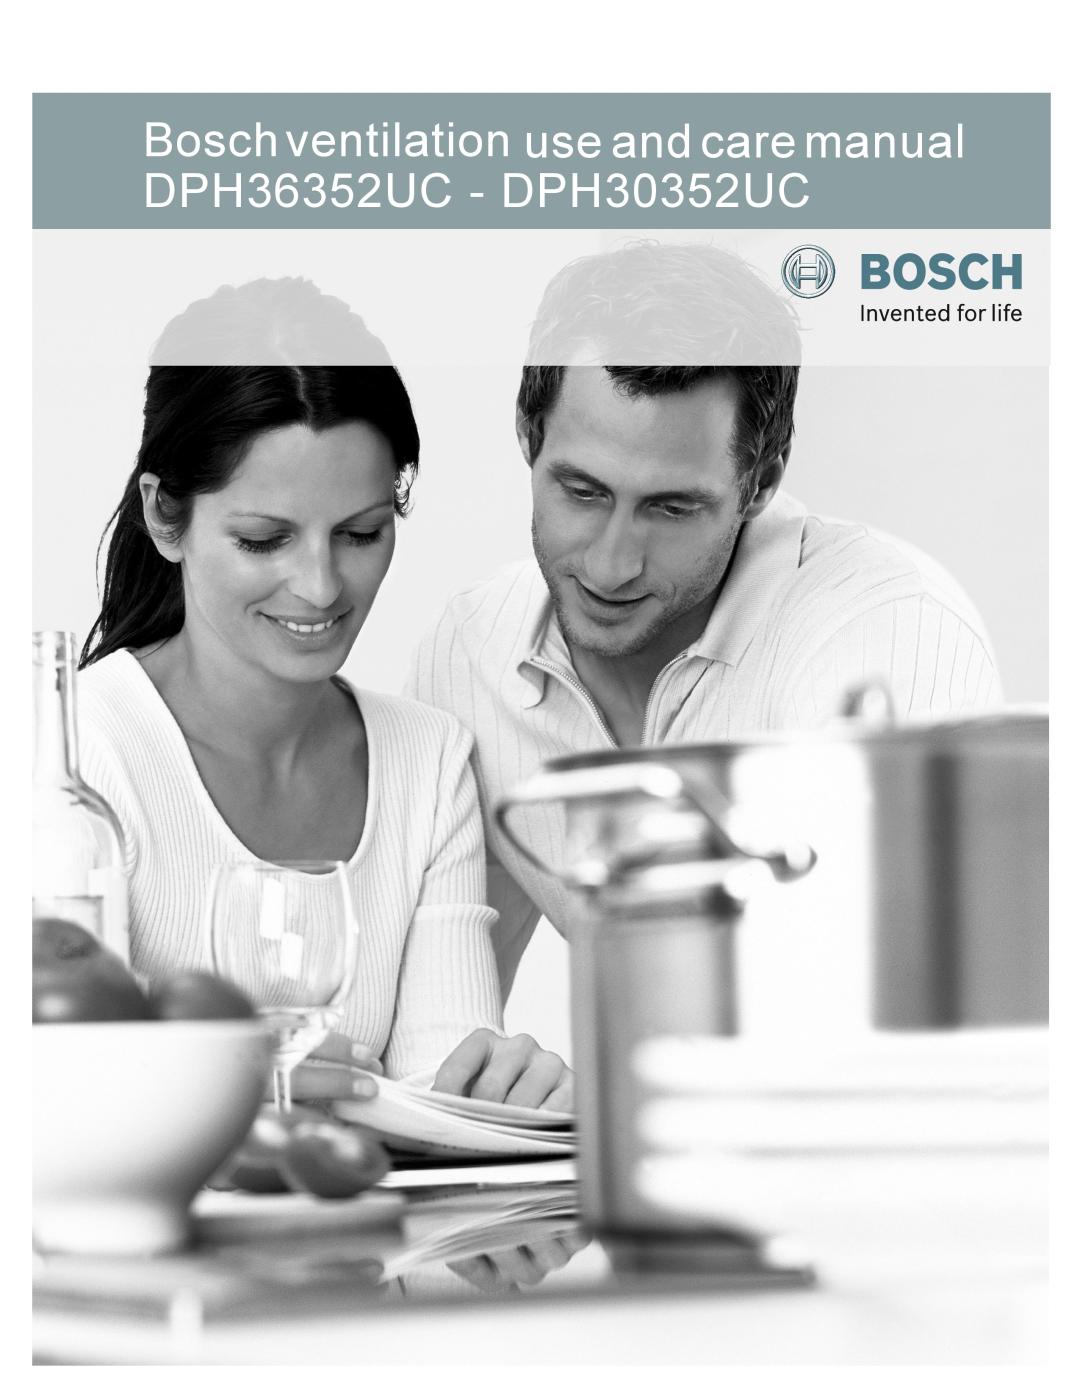 Bosch Appliances manual Bosch ventilation use and care manual DPH36352UC - DPH30352UC 